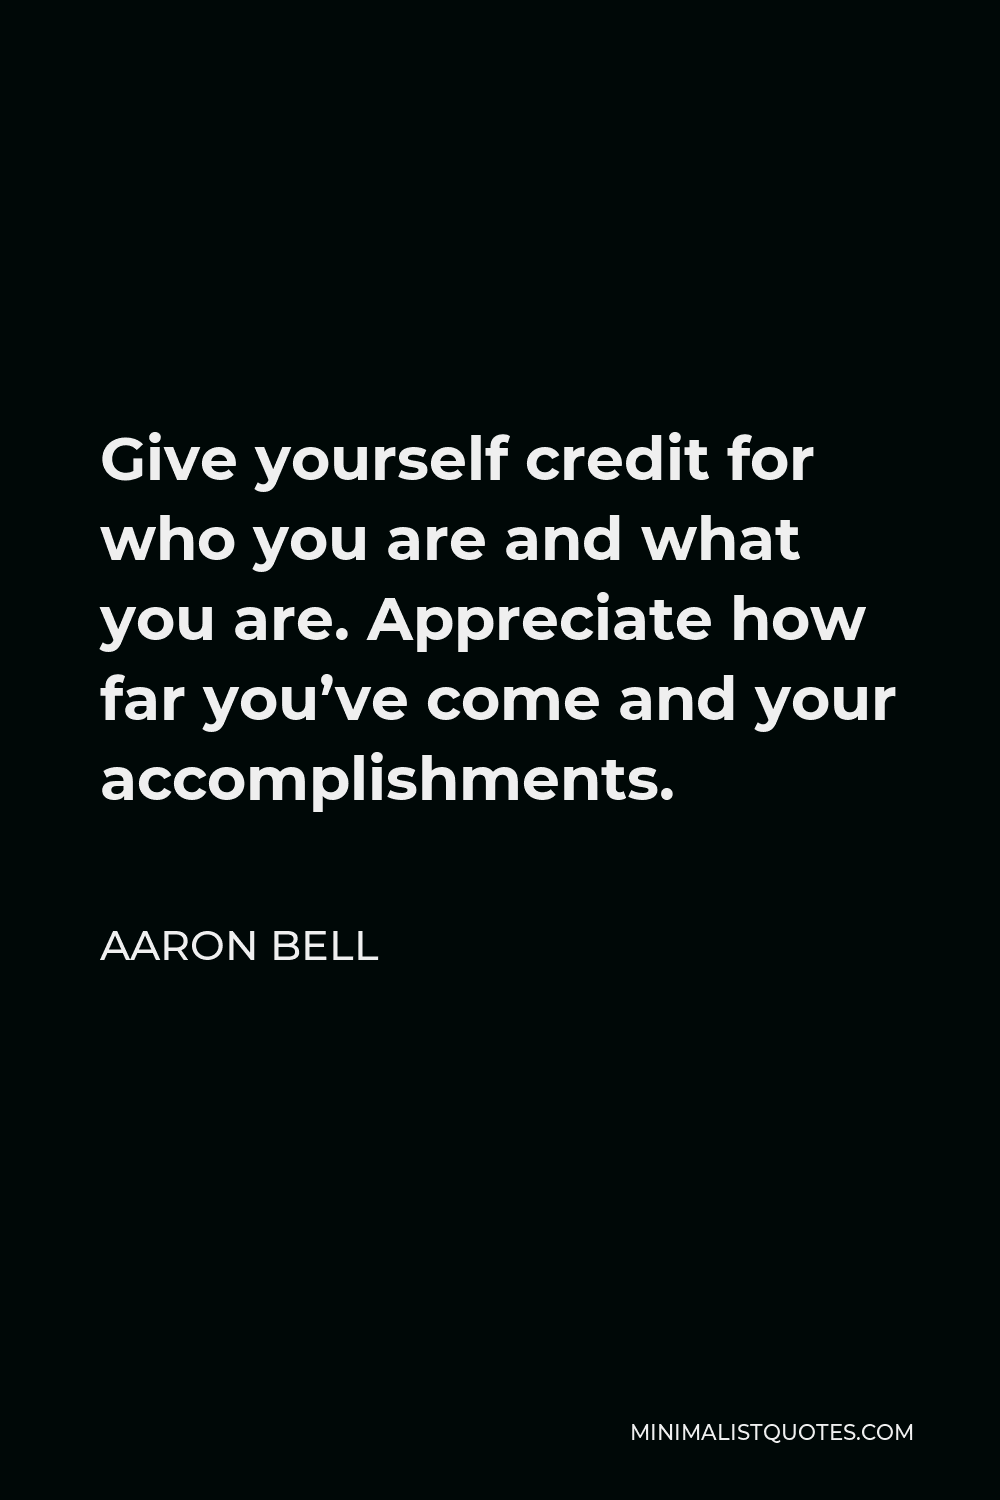 Aaron Bell Quote - Give yourself credit for who you are and what you are. Appreciate how far you’ve come and your accomplishments.